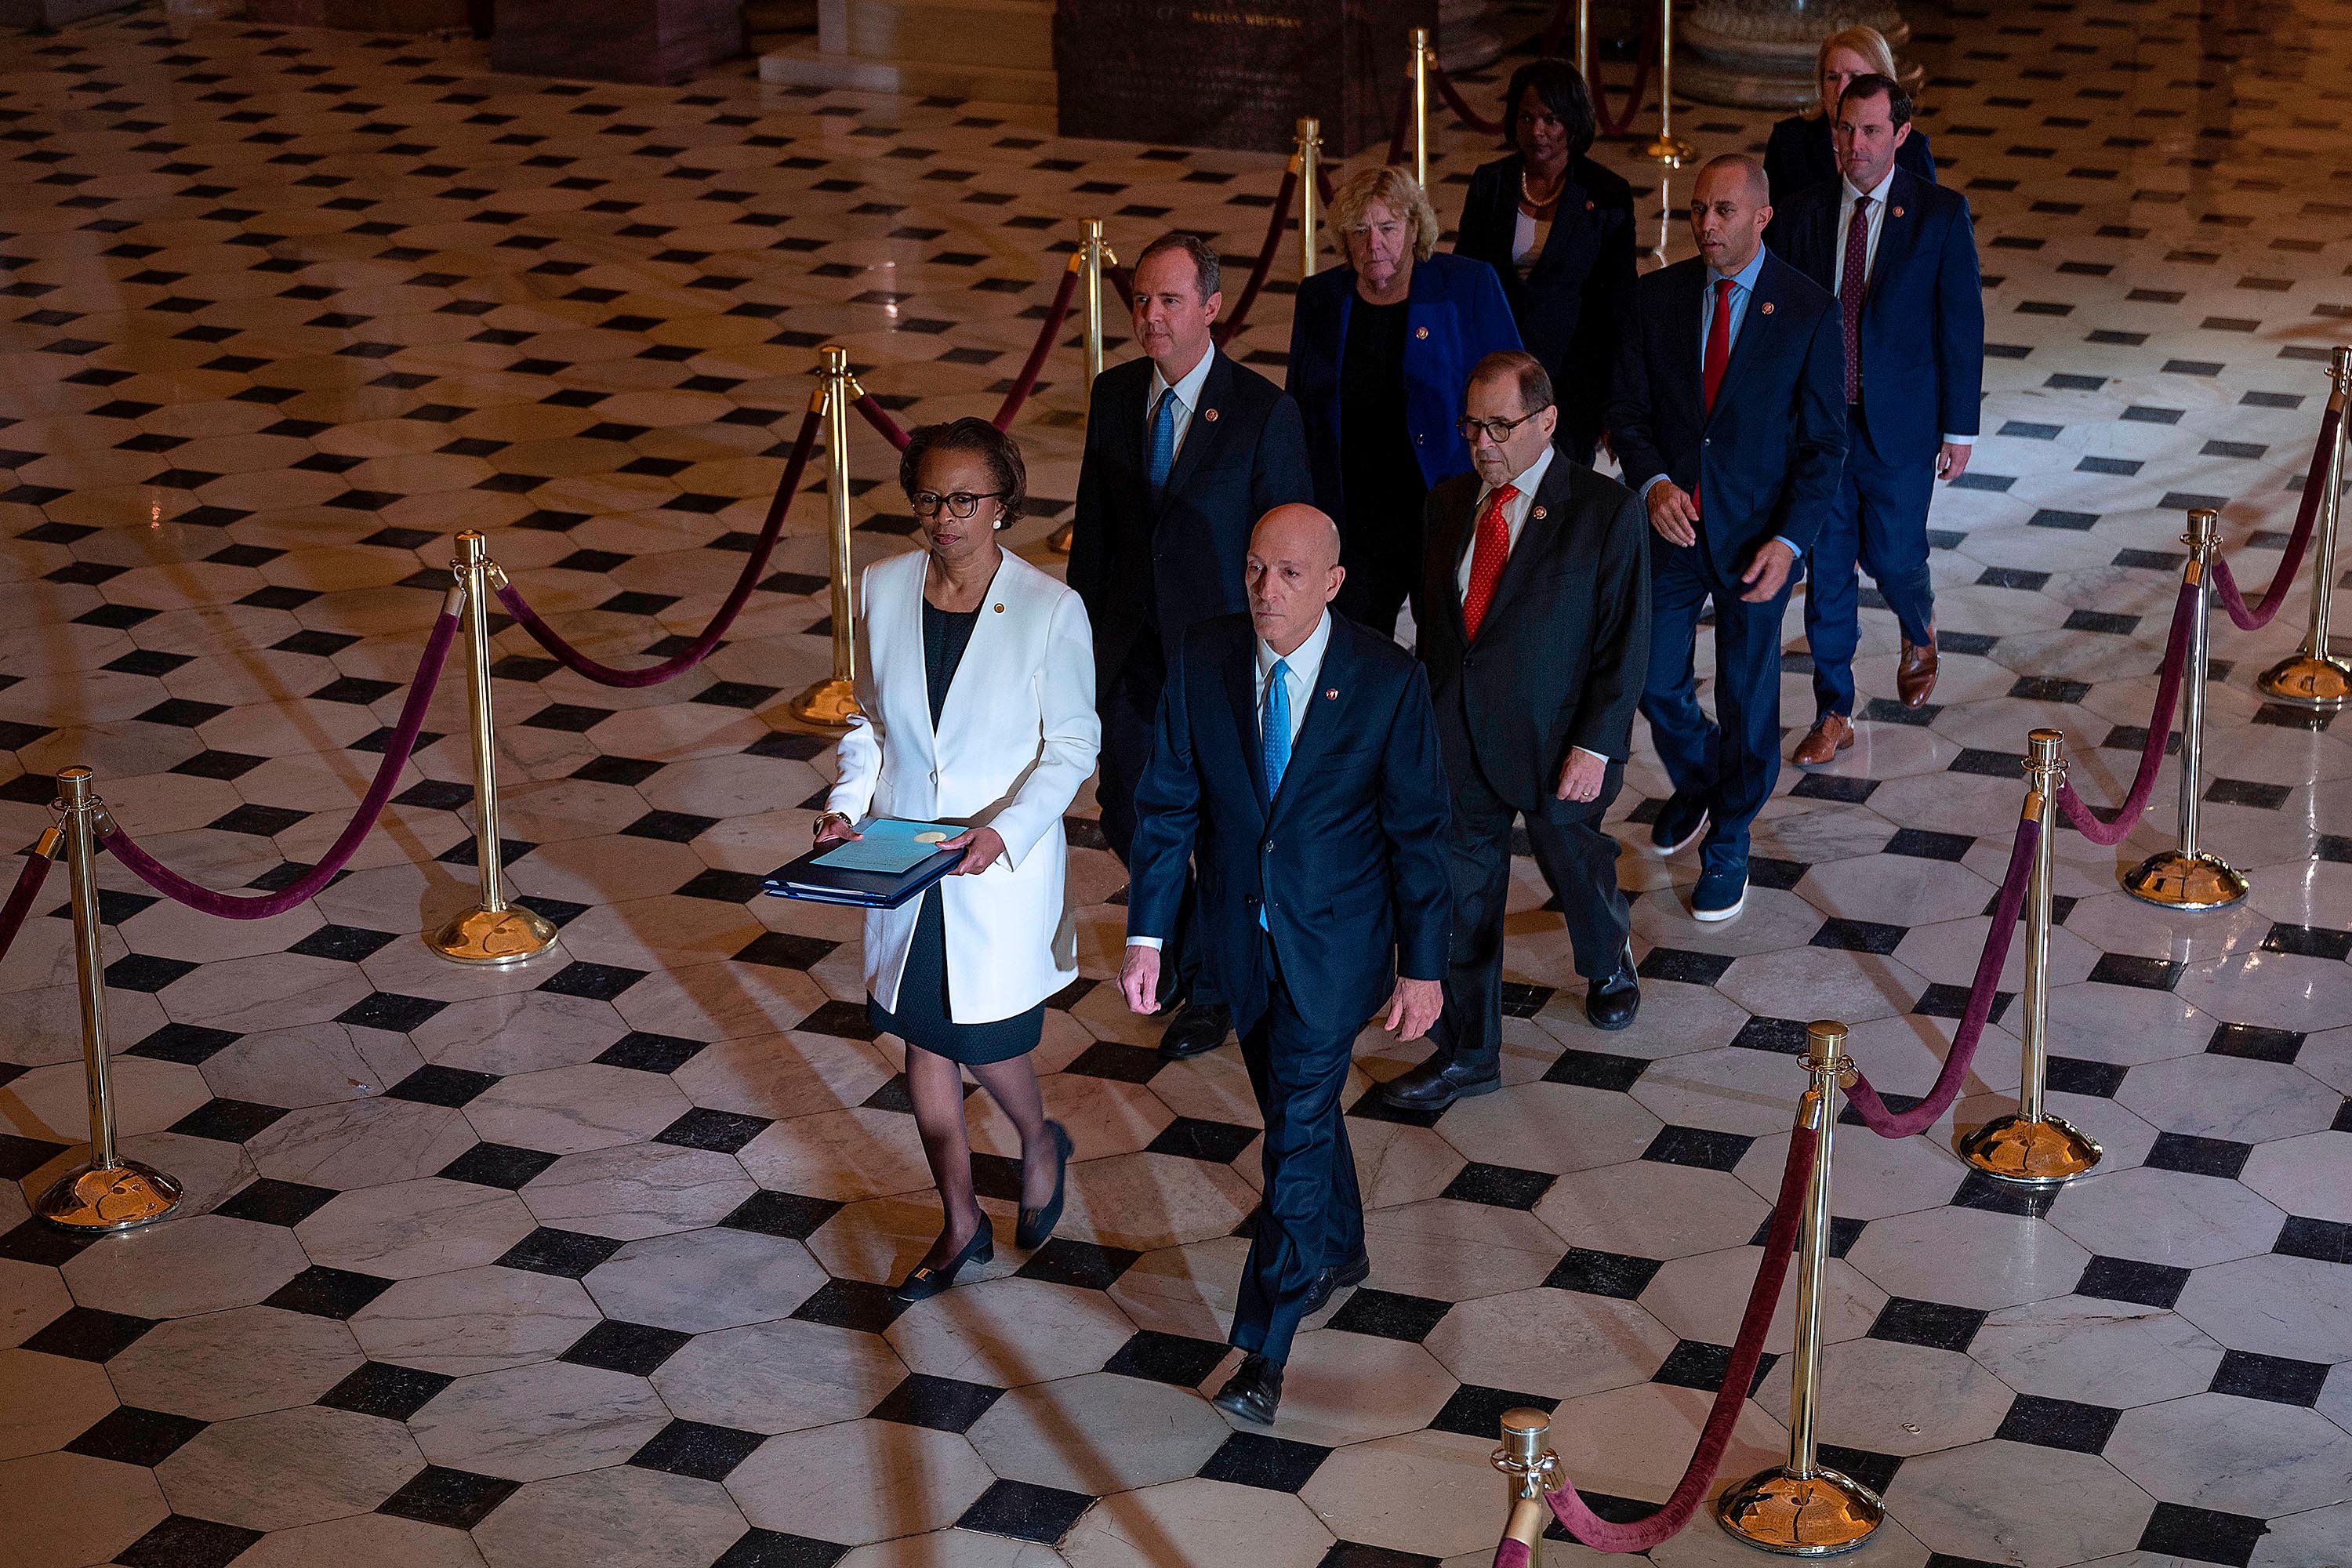 House managers walk to the US Senate to deliver the articles of impeachment against President Trump on Capitol Hill on Jan. 15.